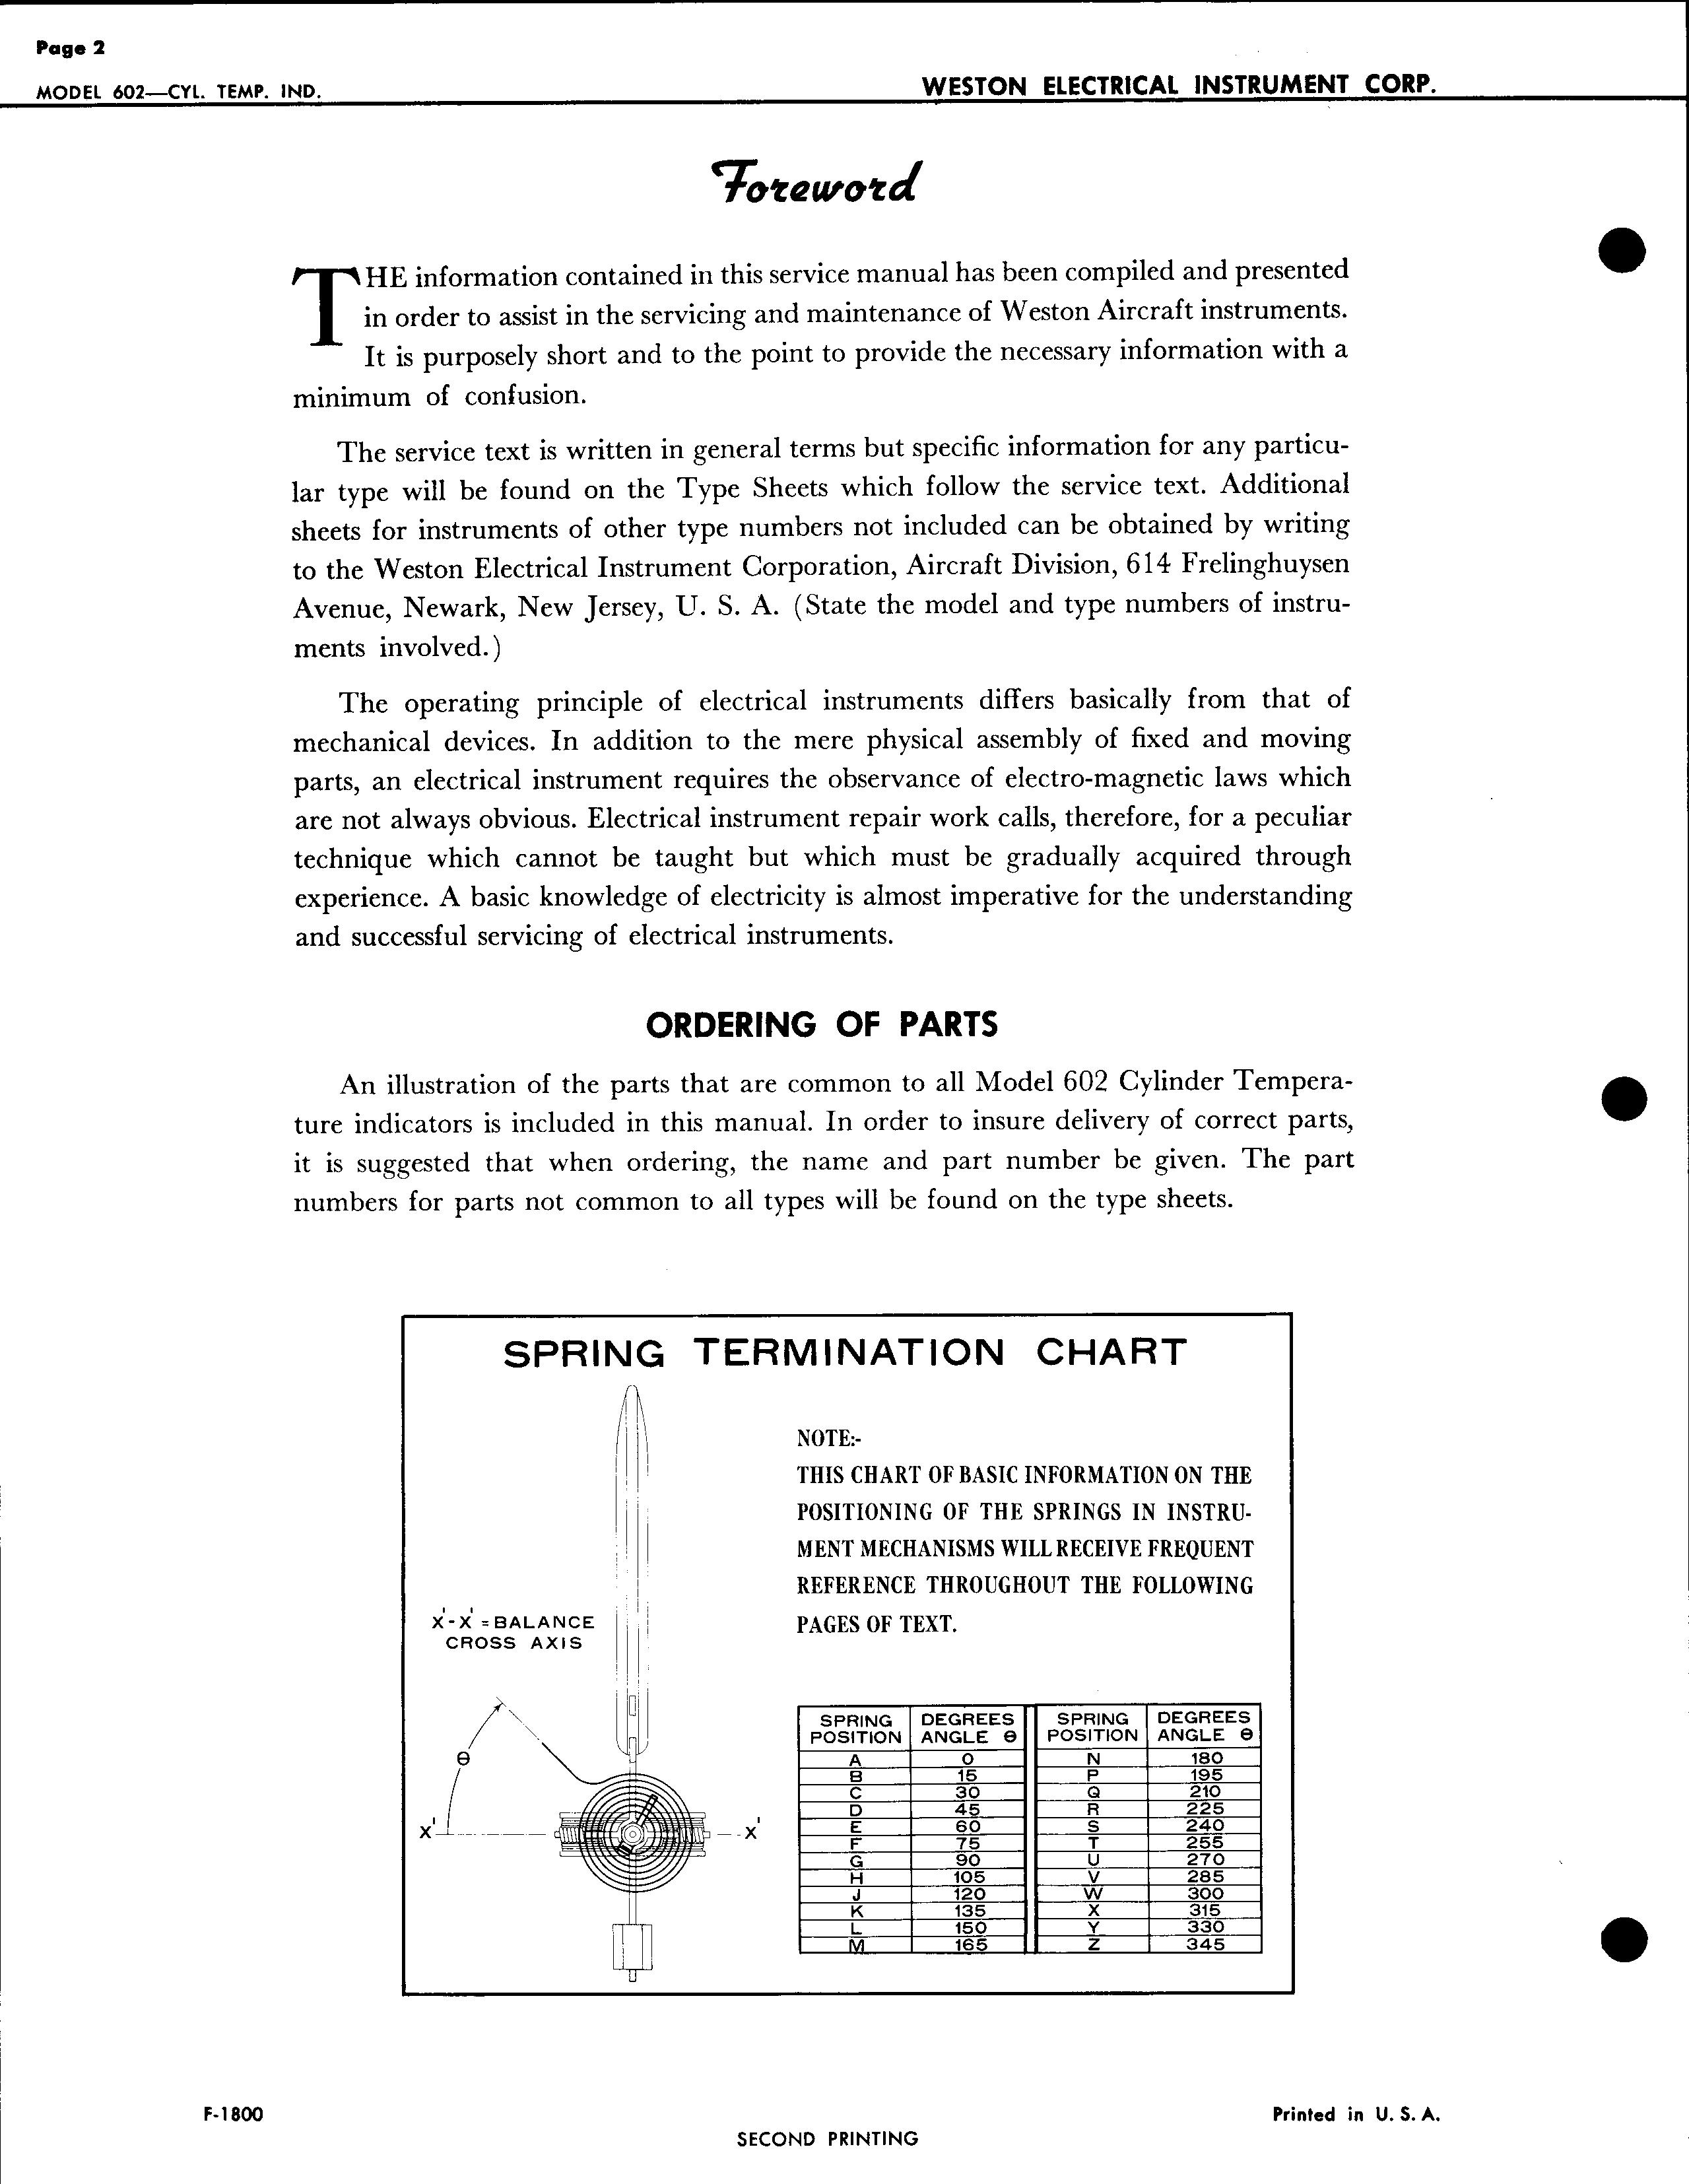 Sample page 2 from AirCorps Library document: Service Instructions for Model 602 Cylinder Temperature Indicators